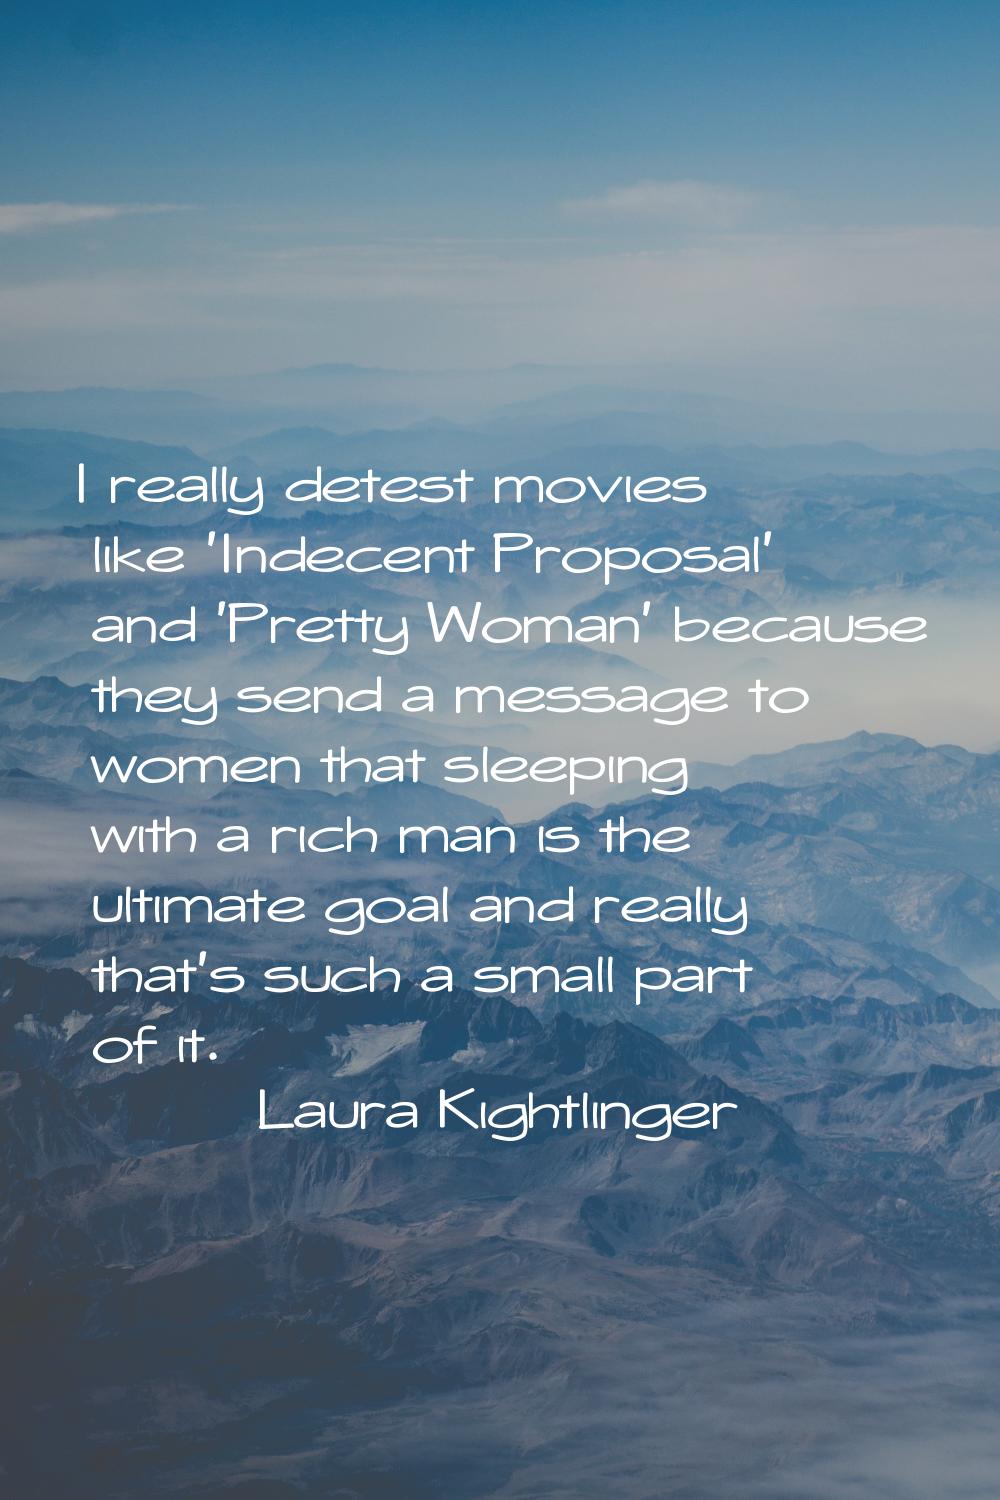 I really detest movies like 'Indecent Proposal' and 'Pretty Woman' because they send a message to w